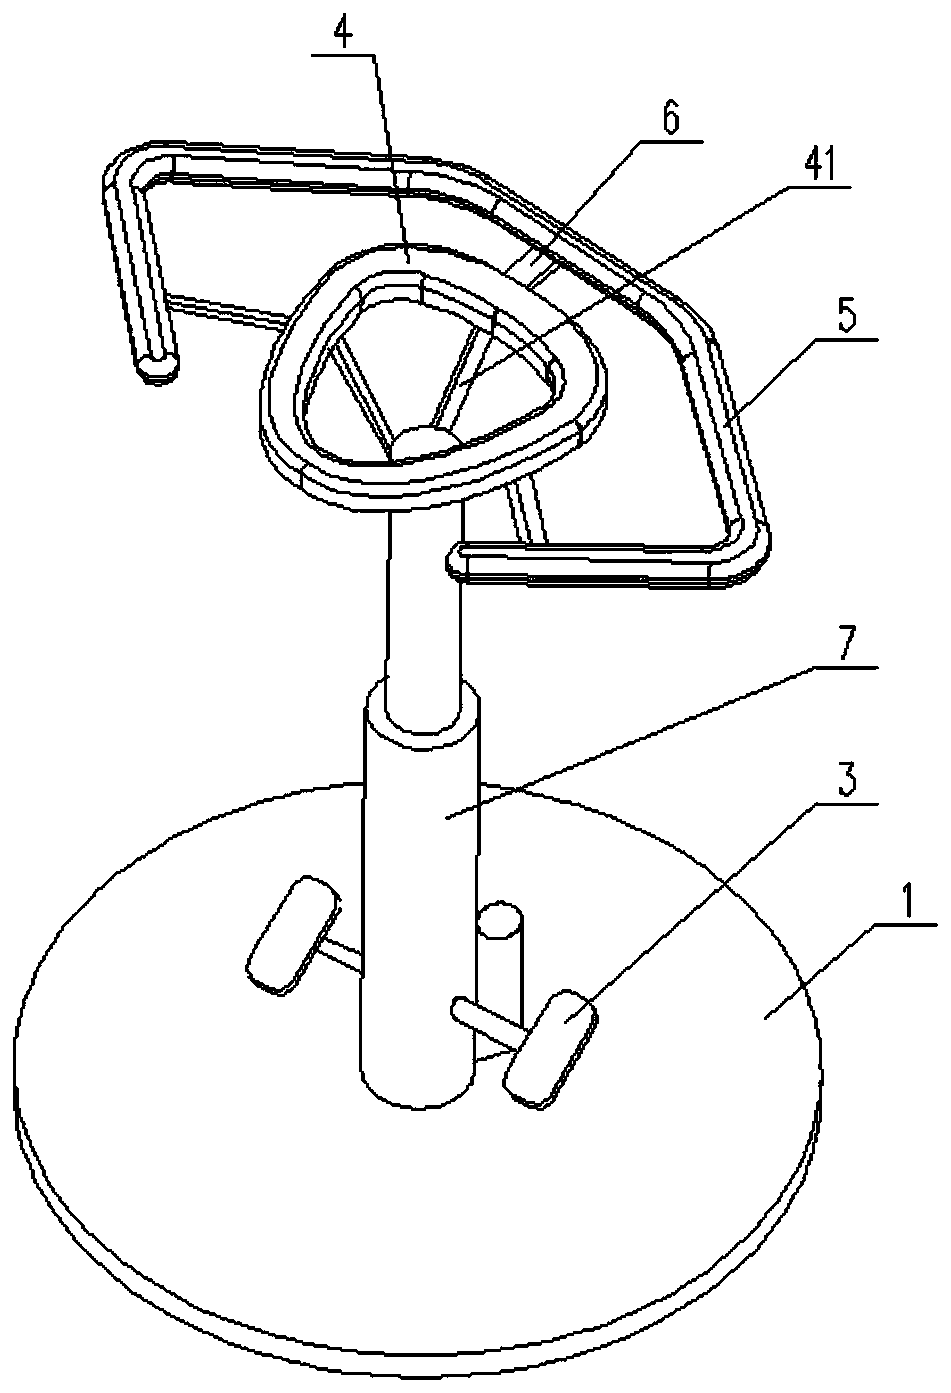 Intraspinal anesthesia support frame for facilitating sitting of patients